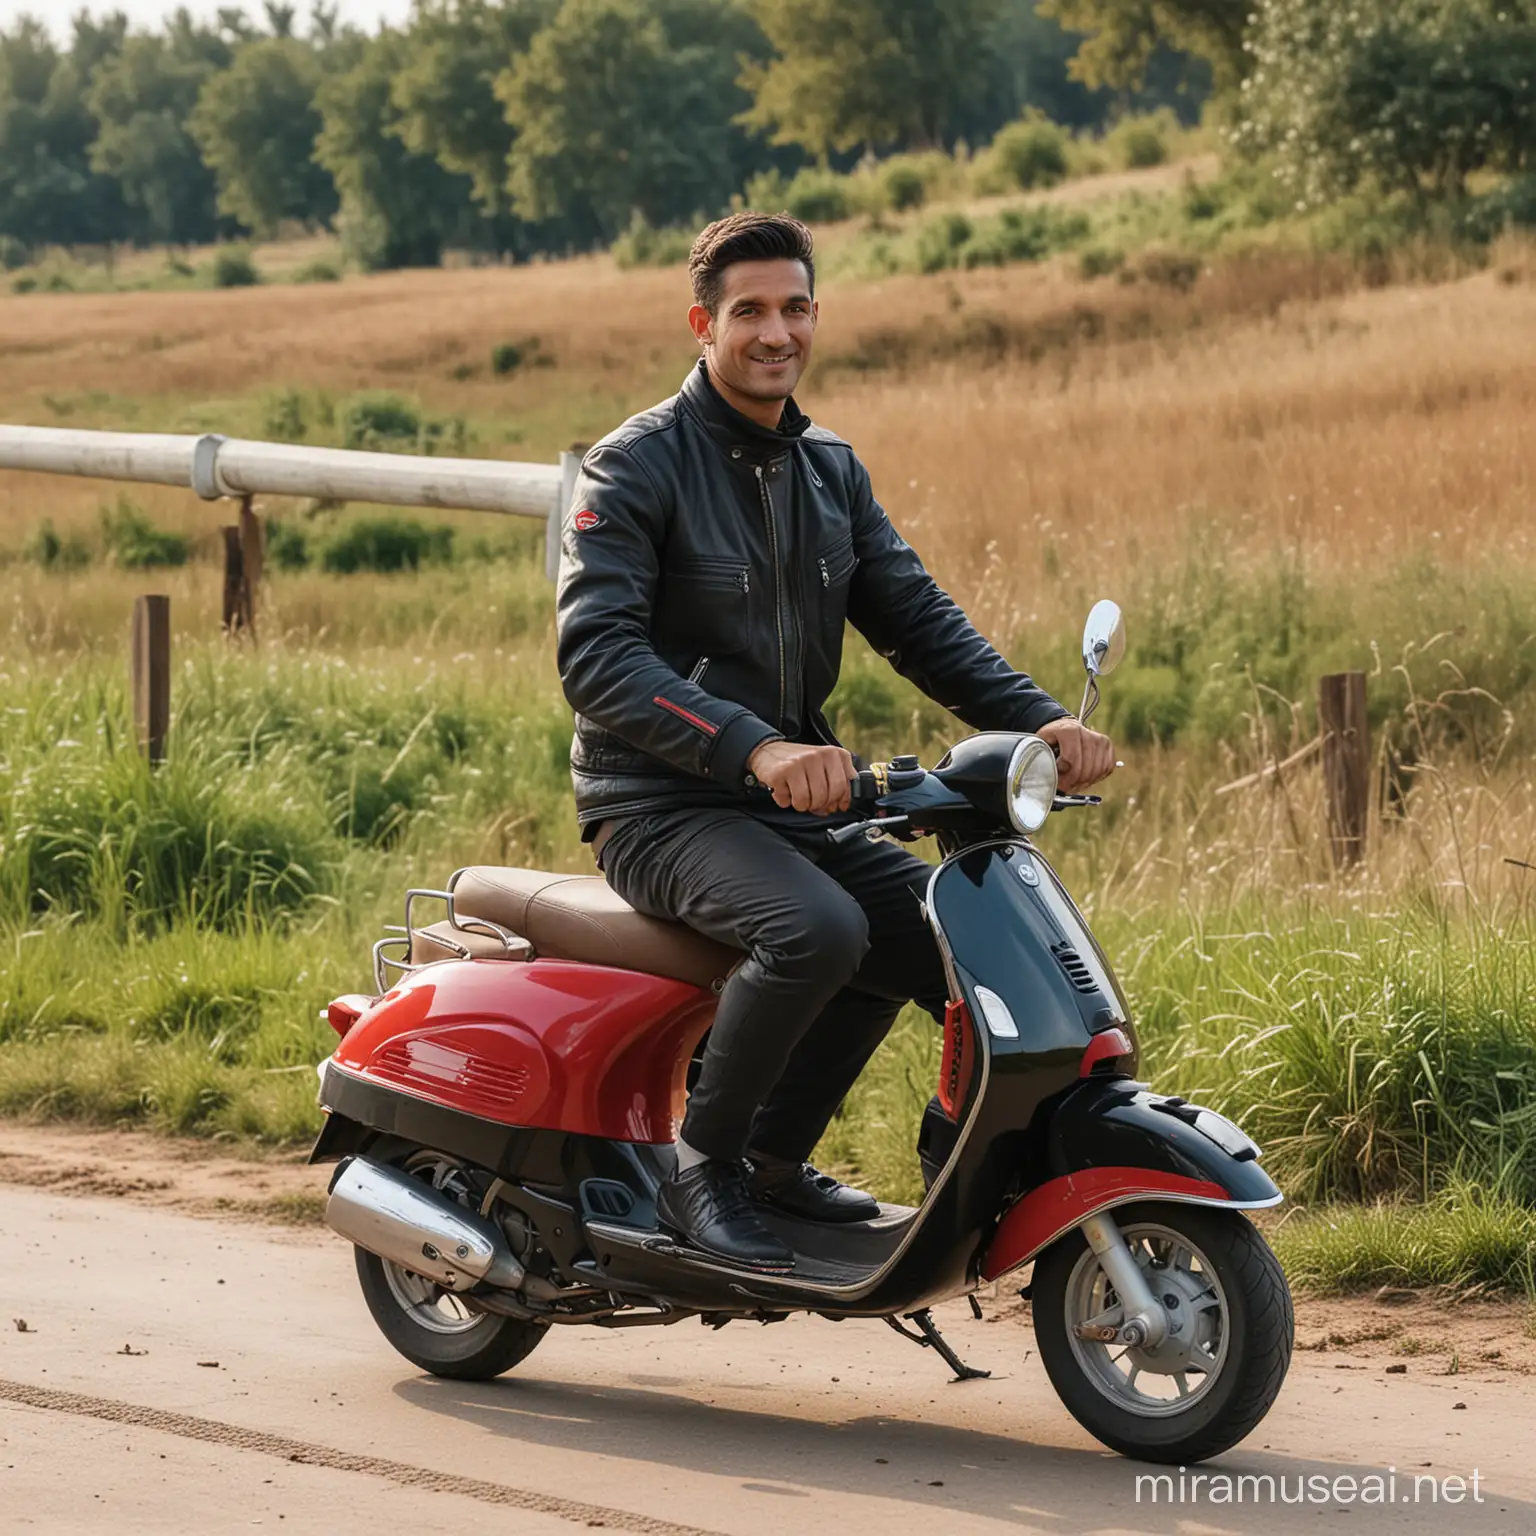 Man Riding Vespa Motorbike in Black Jacket with Red Sleeves in Rural Setting